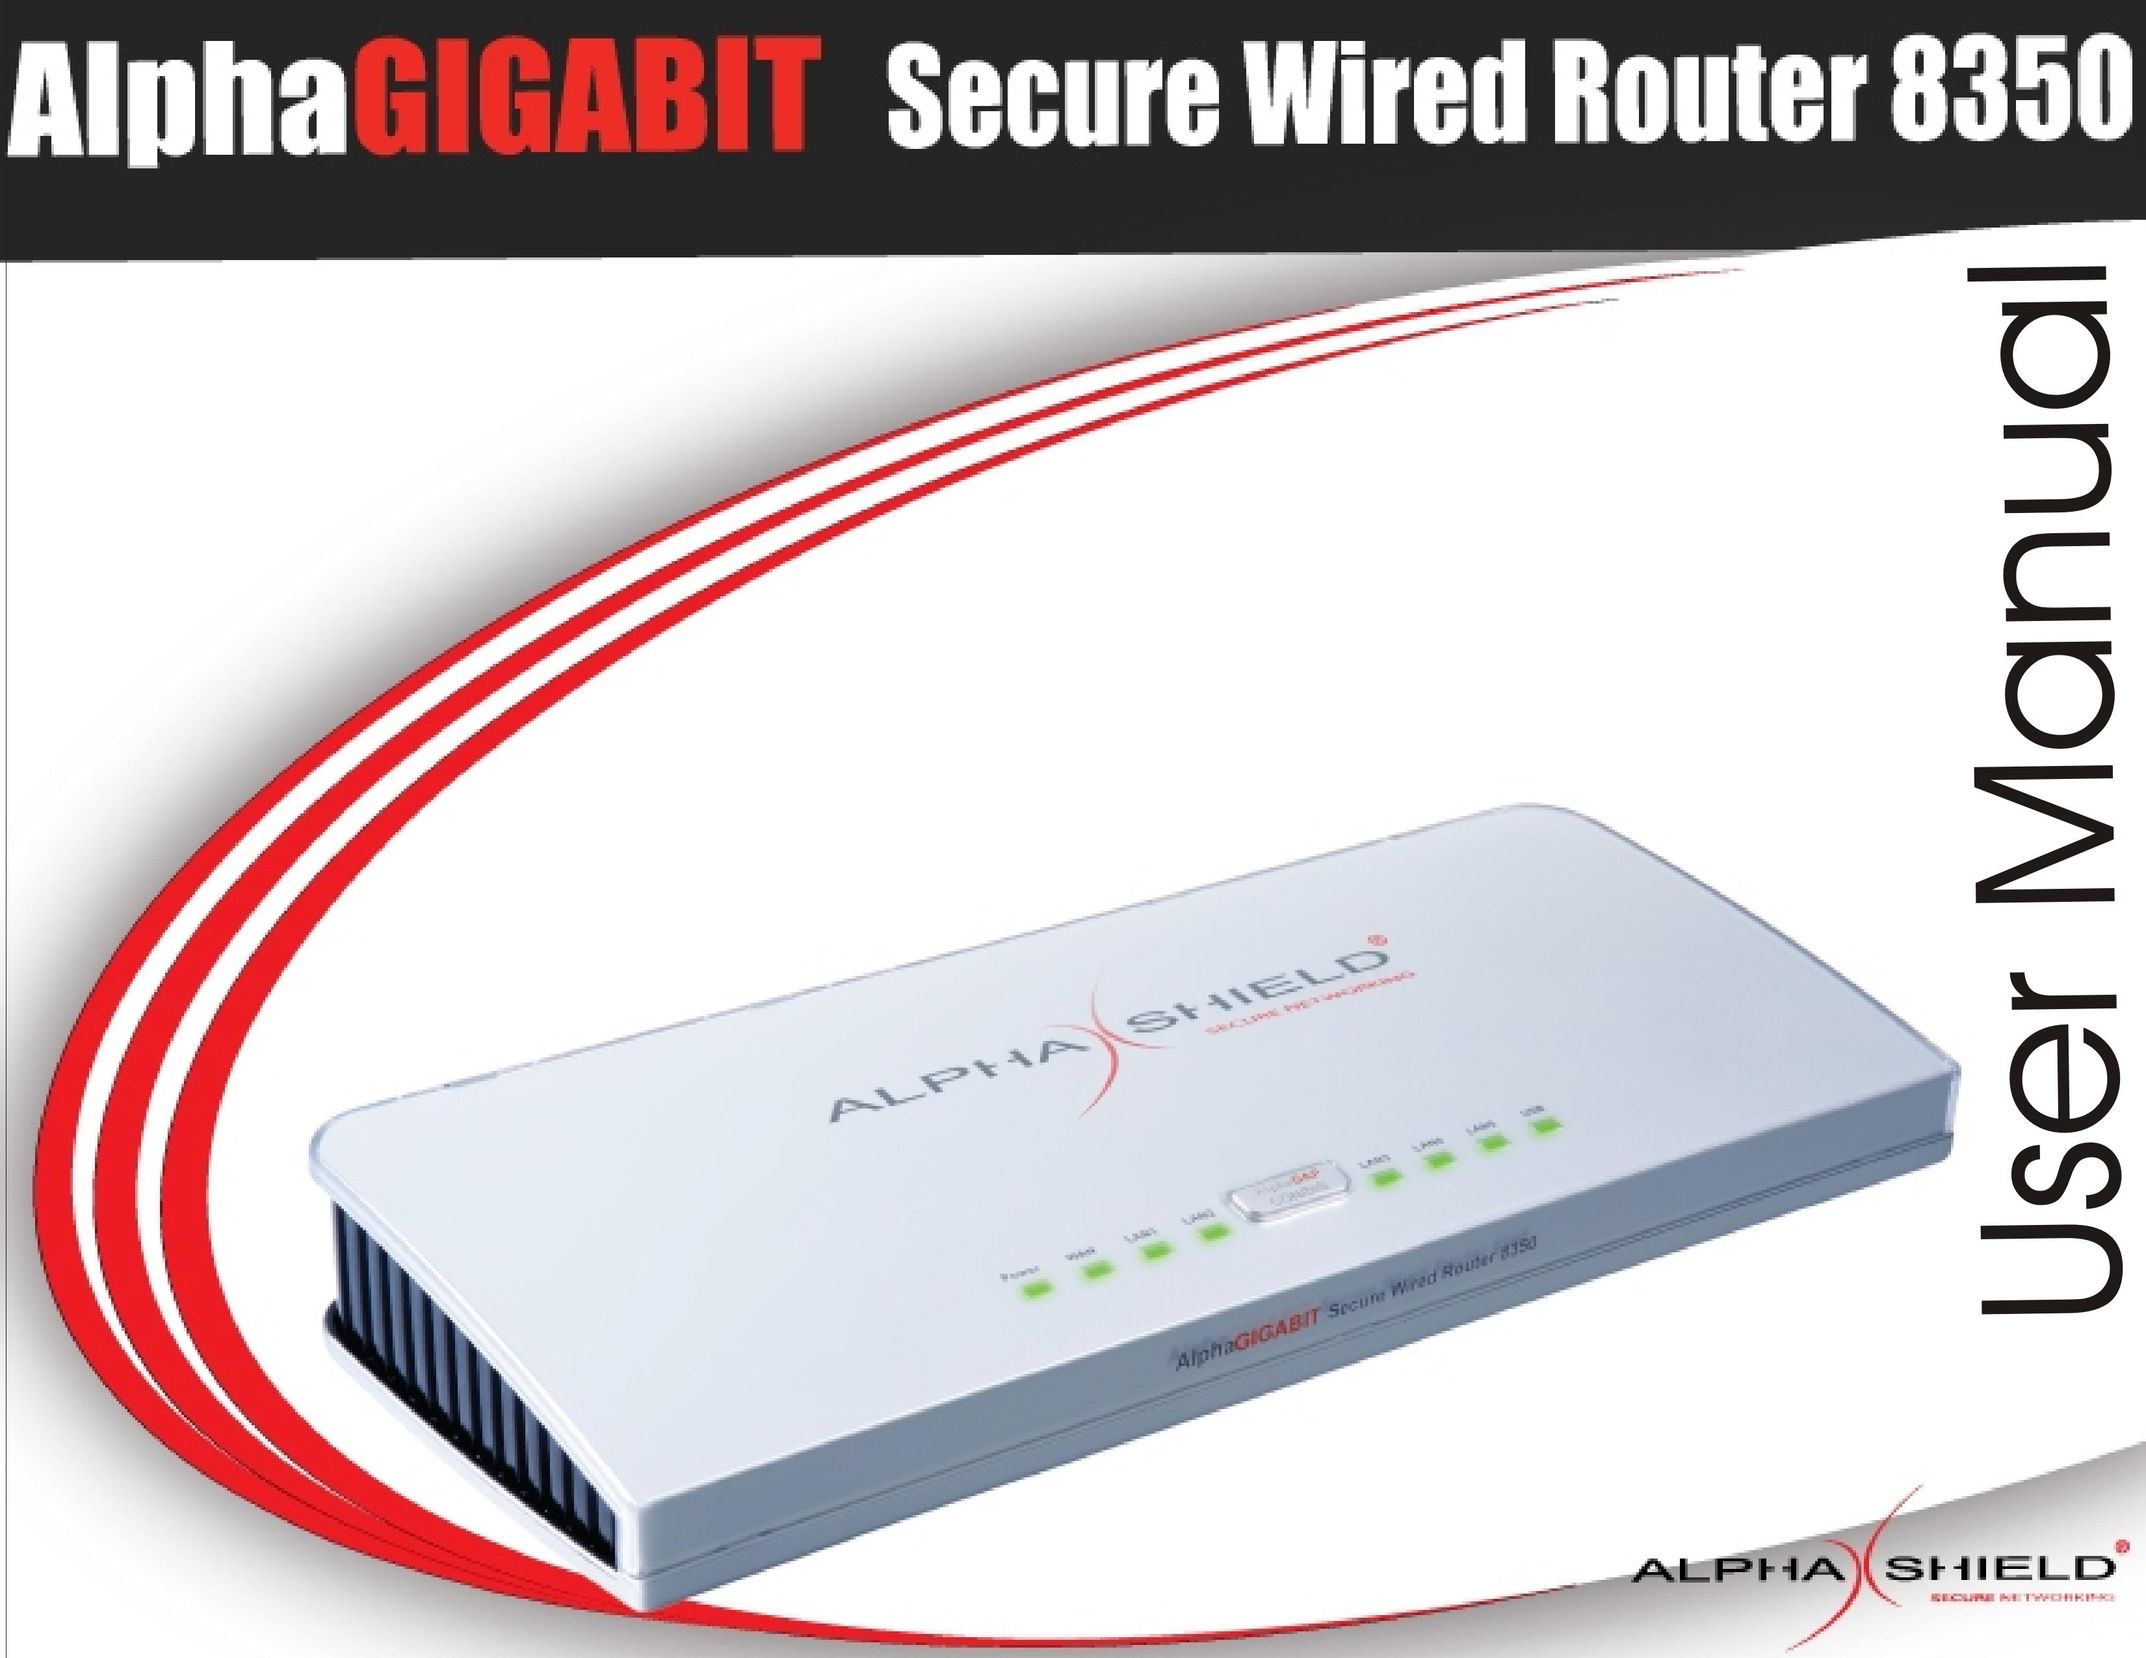 AlphaShield 8350 Network Router User Manual